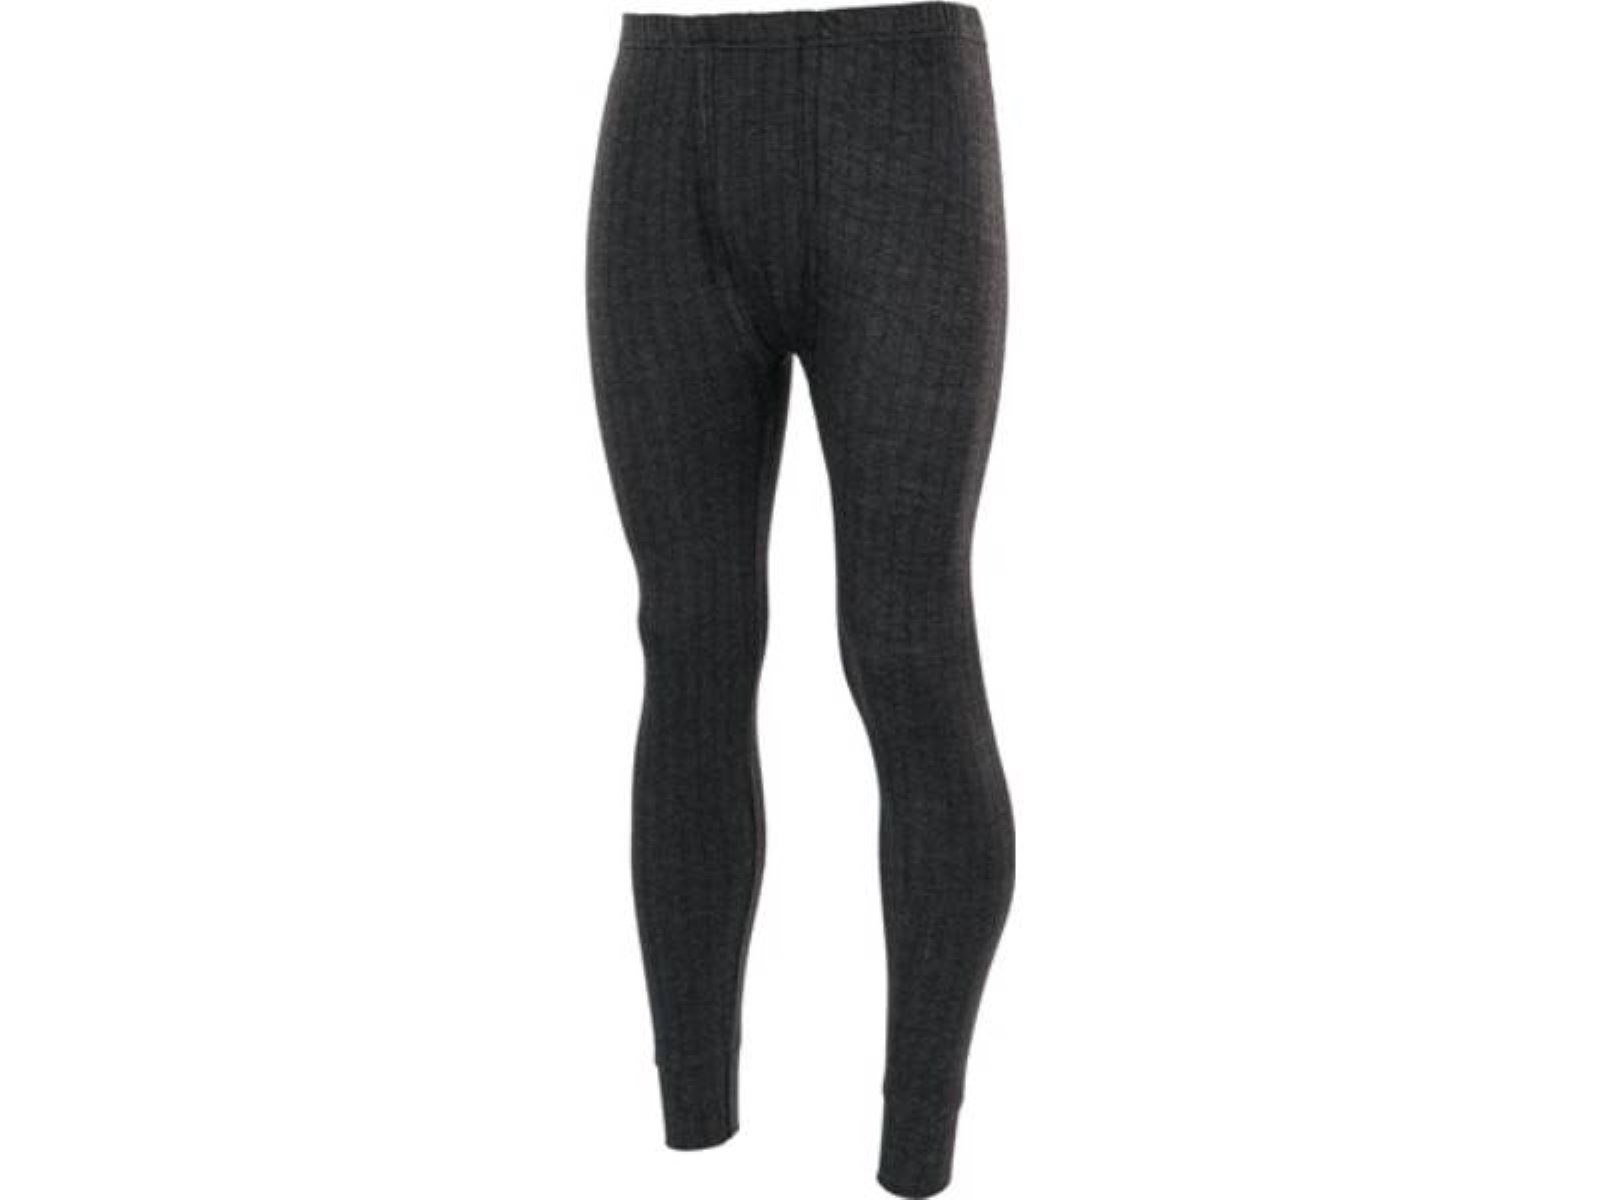 ISM Schutzhose Thermo-Funktionshose THERMOGETIC TRS Gr.XXL anth.ISM Material: 75% Bau